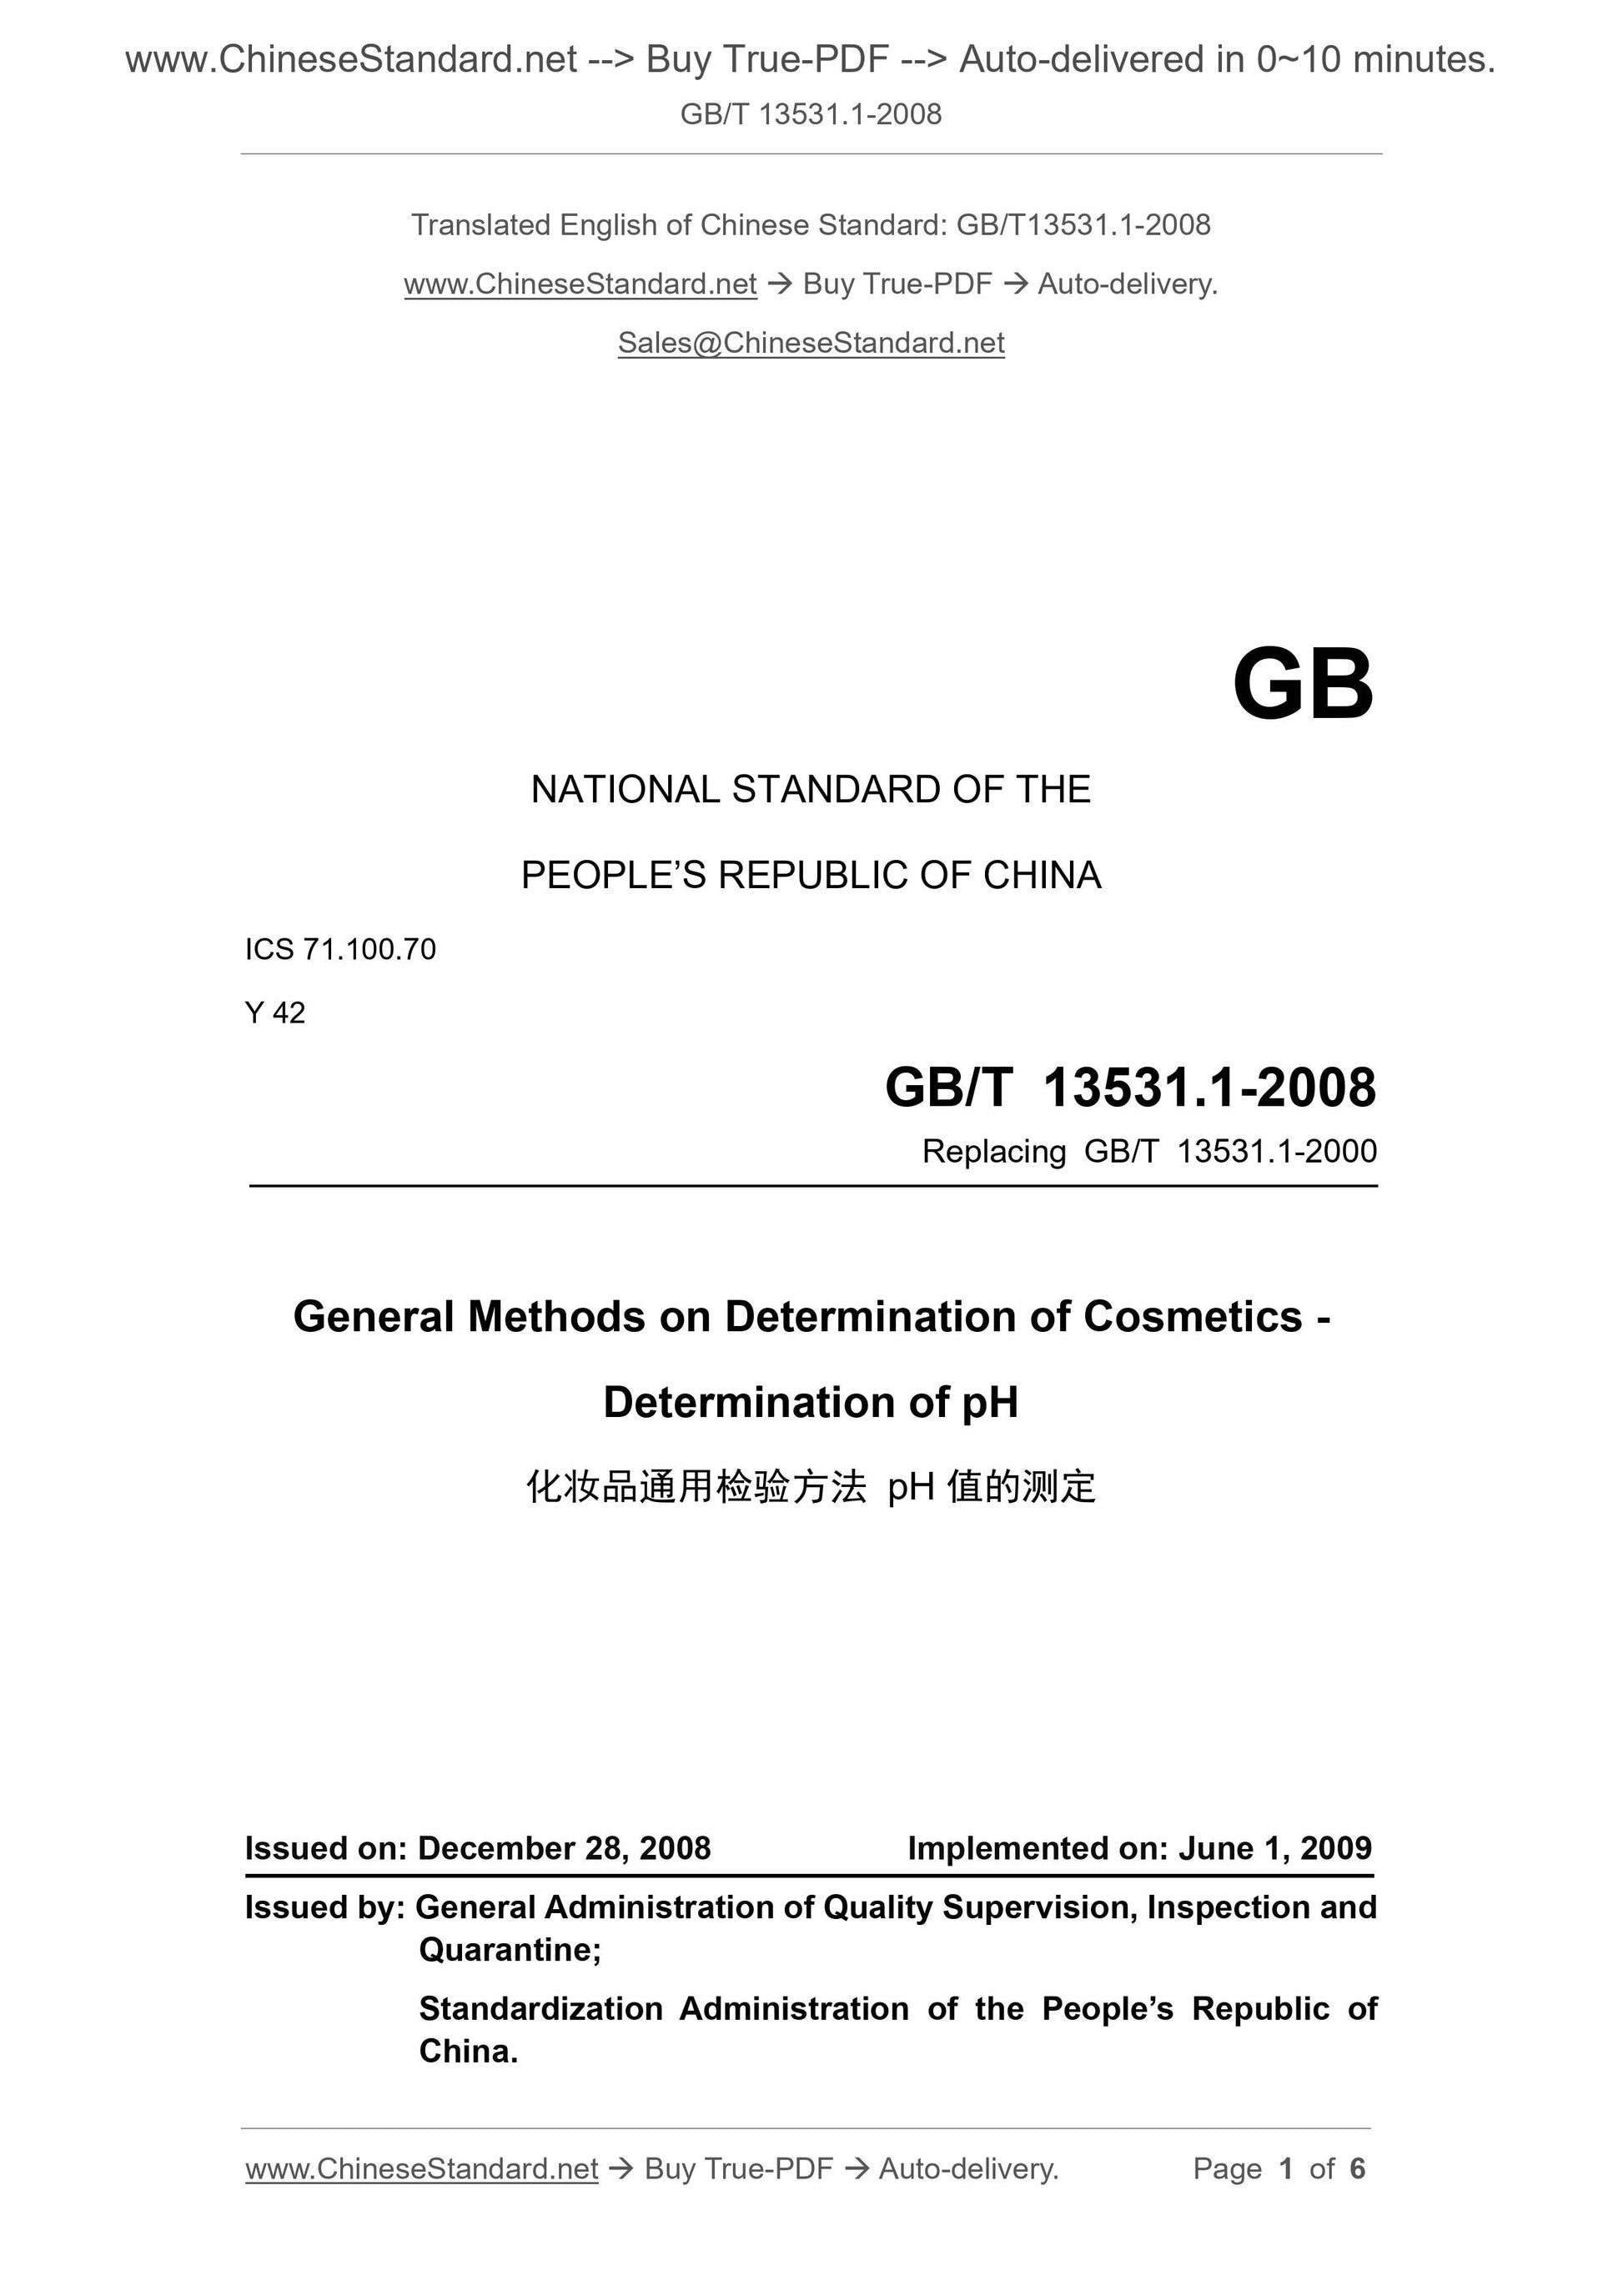 GB/T 13531.1-2008 Page 1